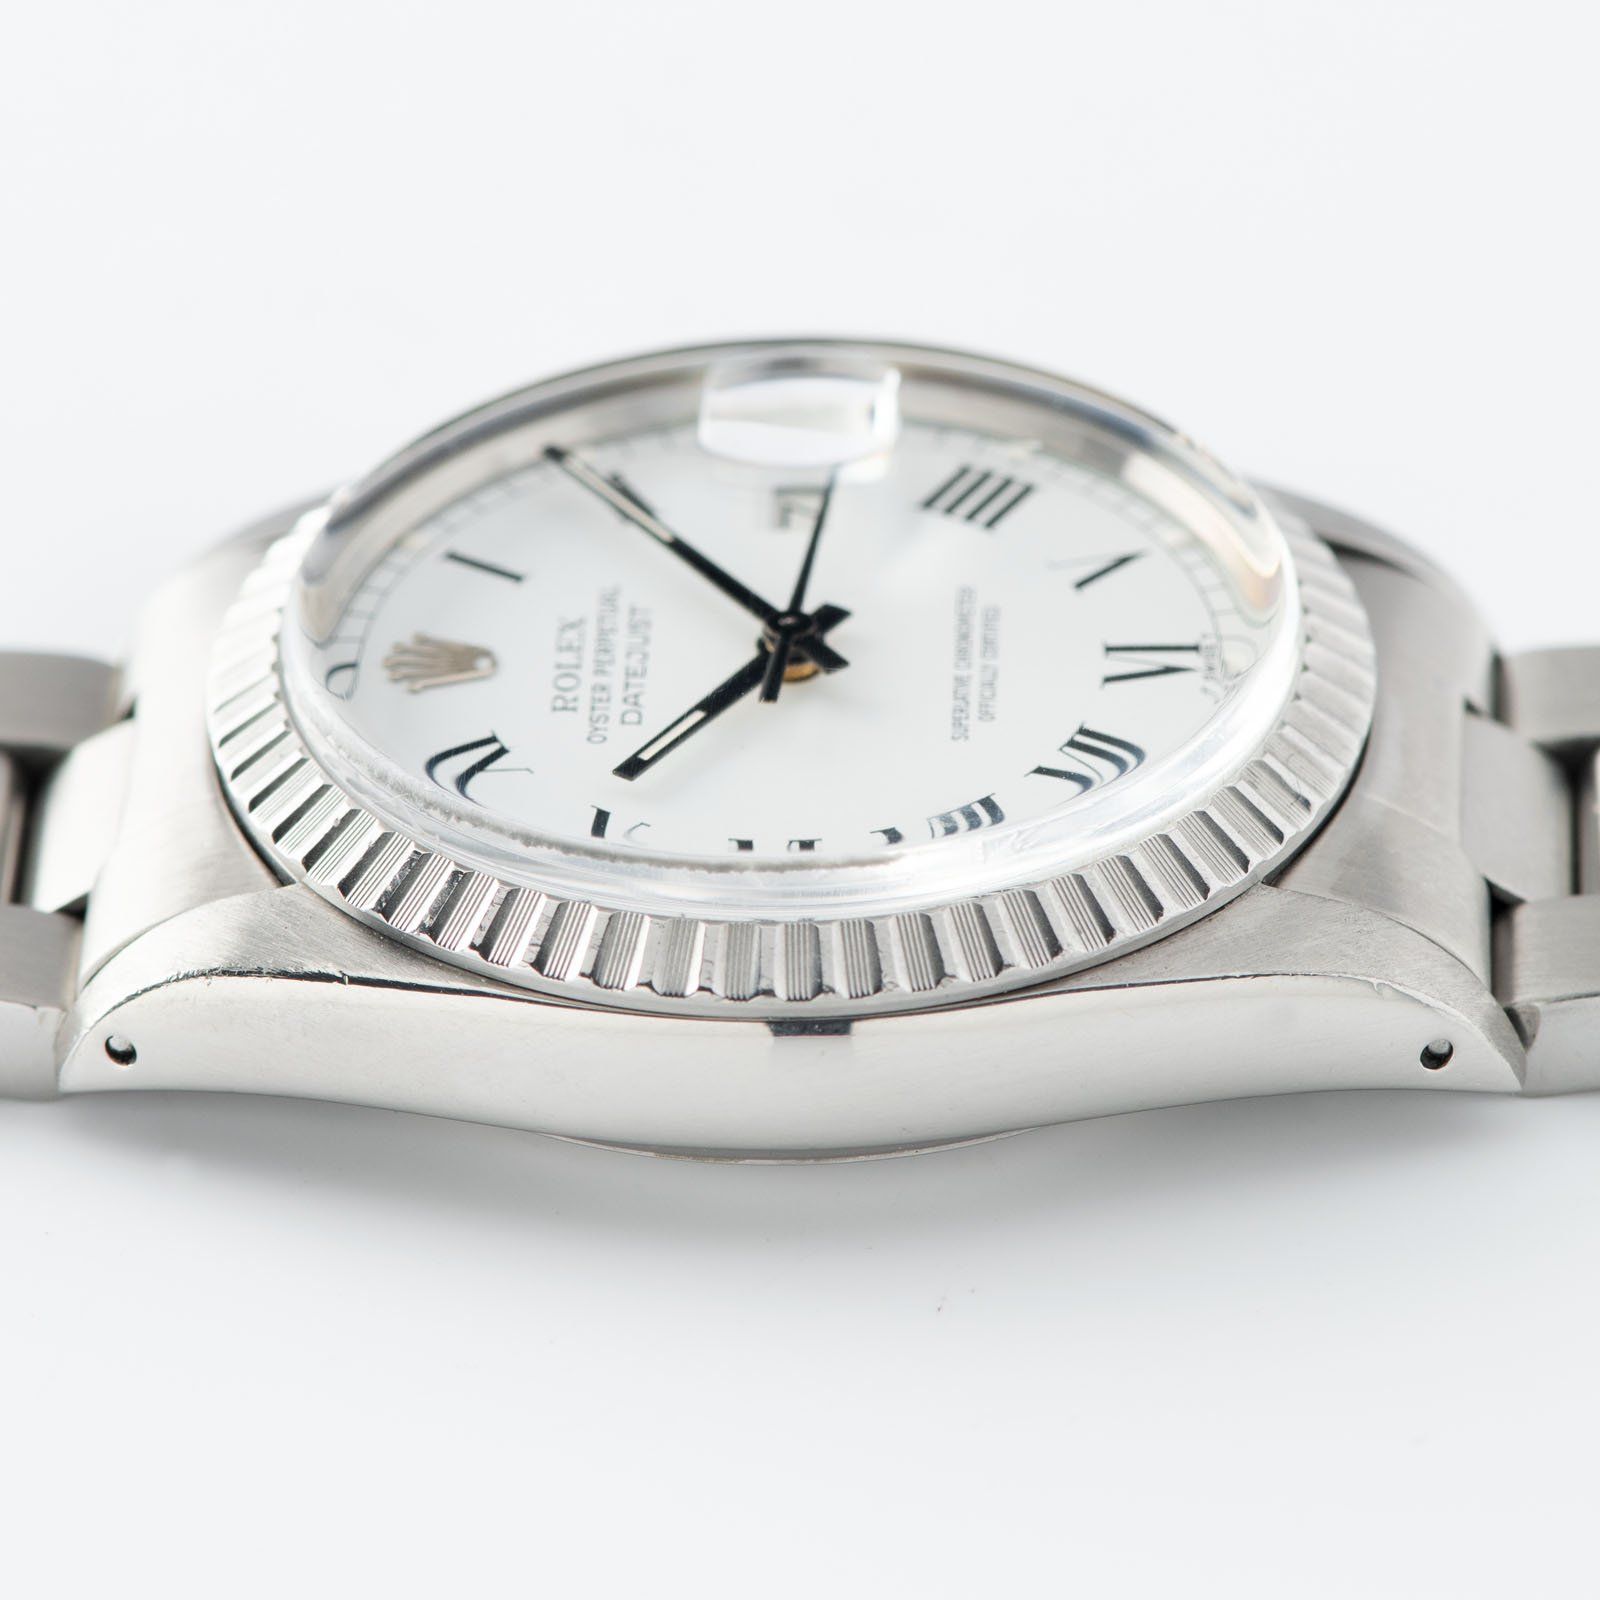 Rolex Datejust Reference 16030 White Buckley Dial 